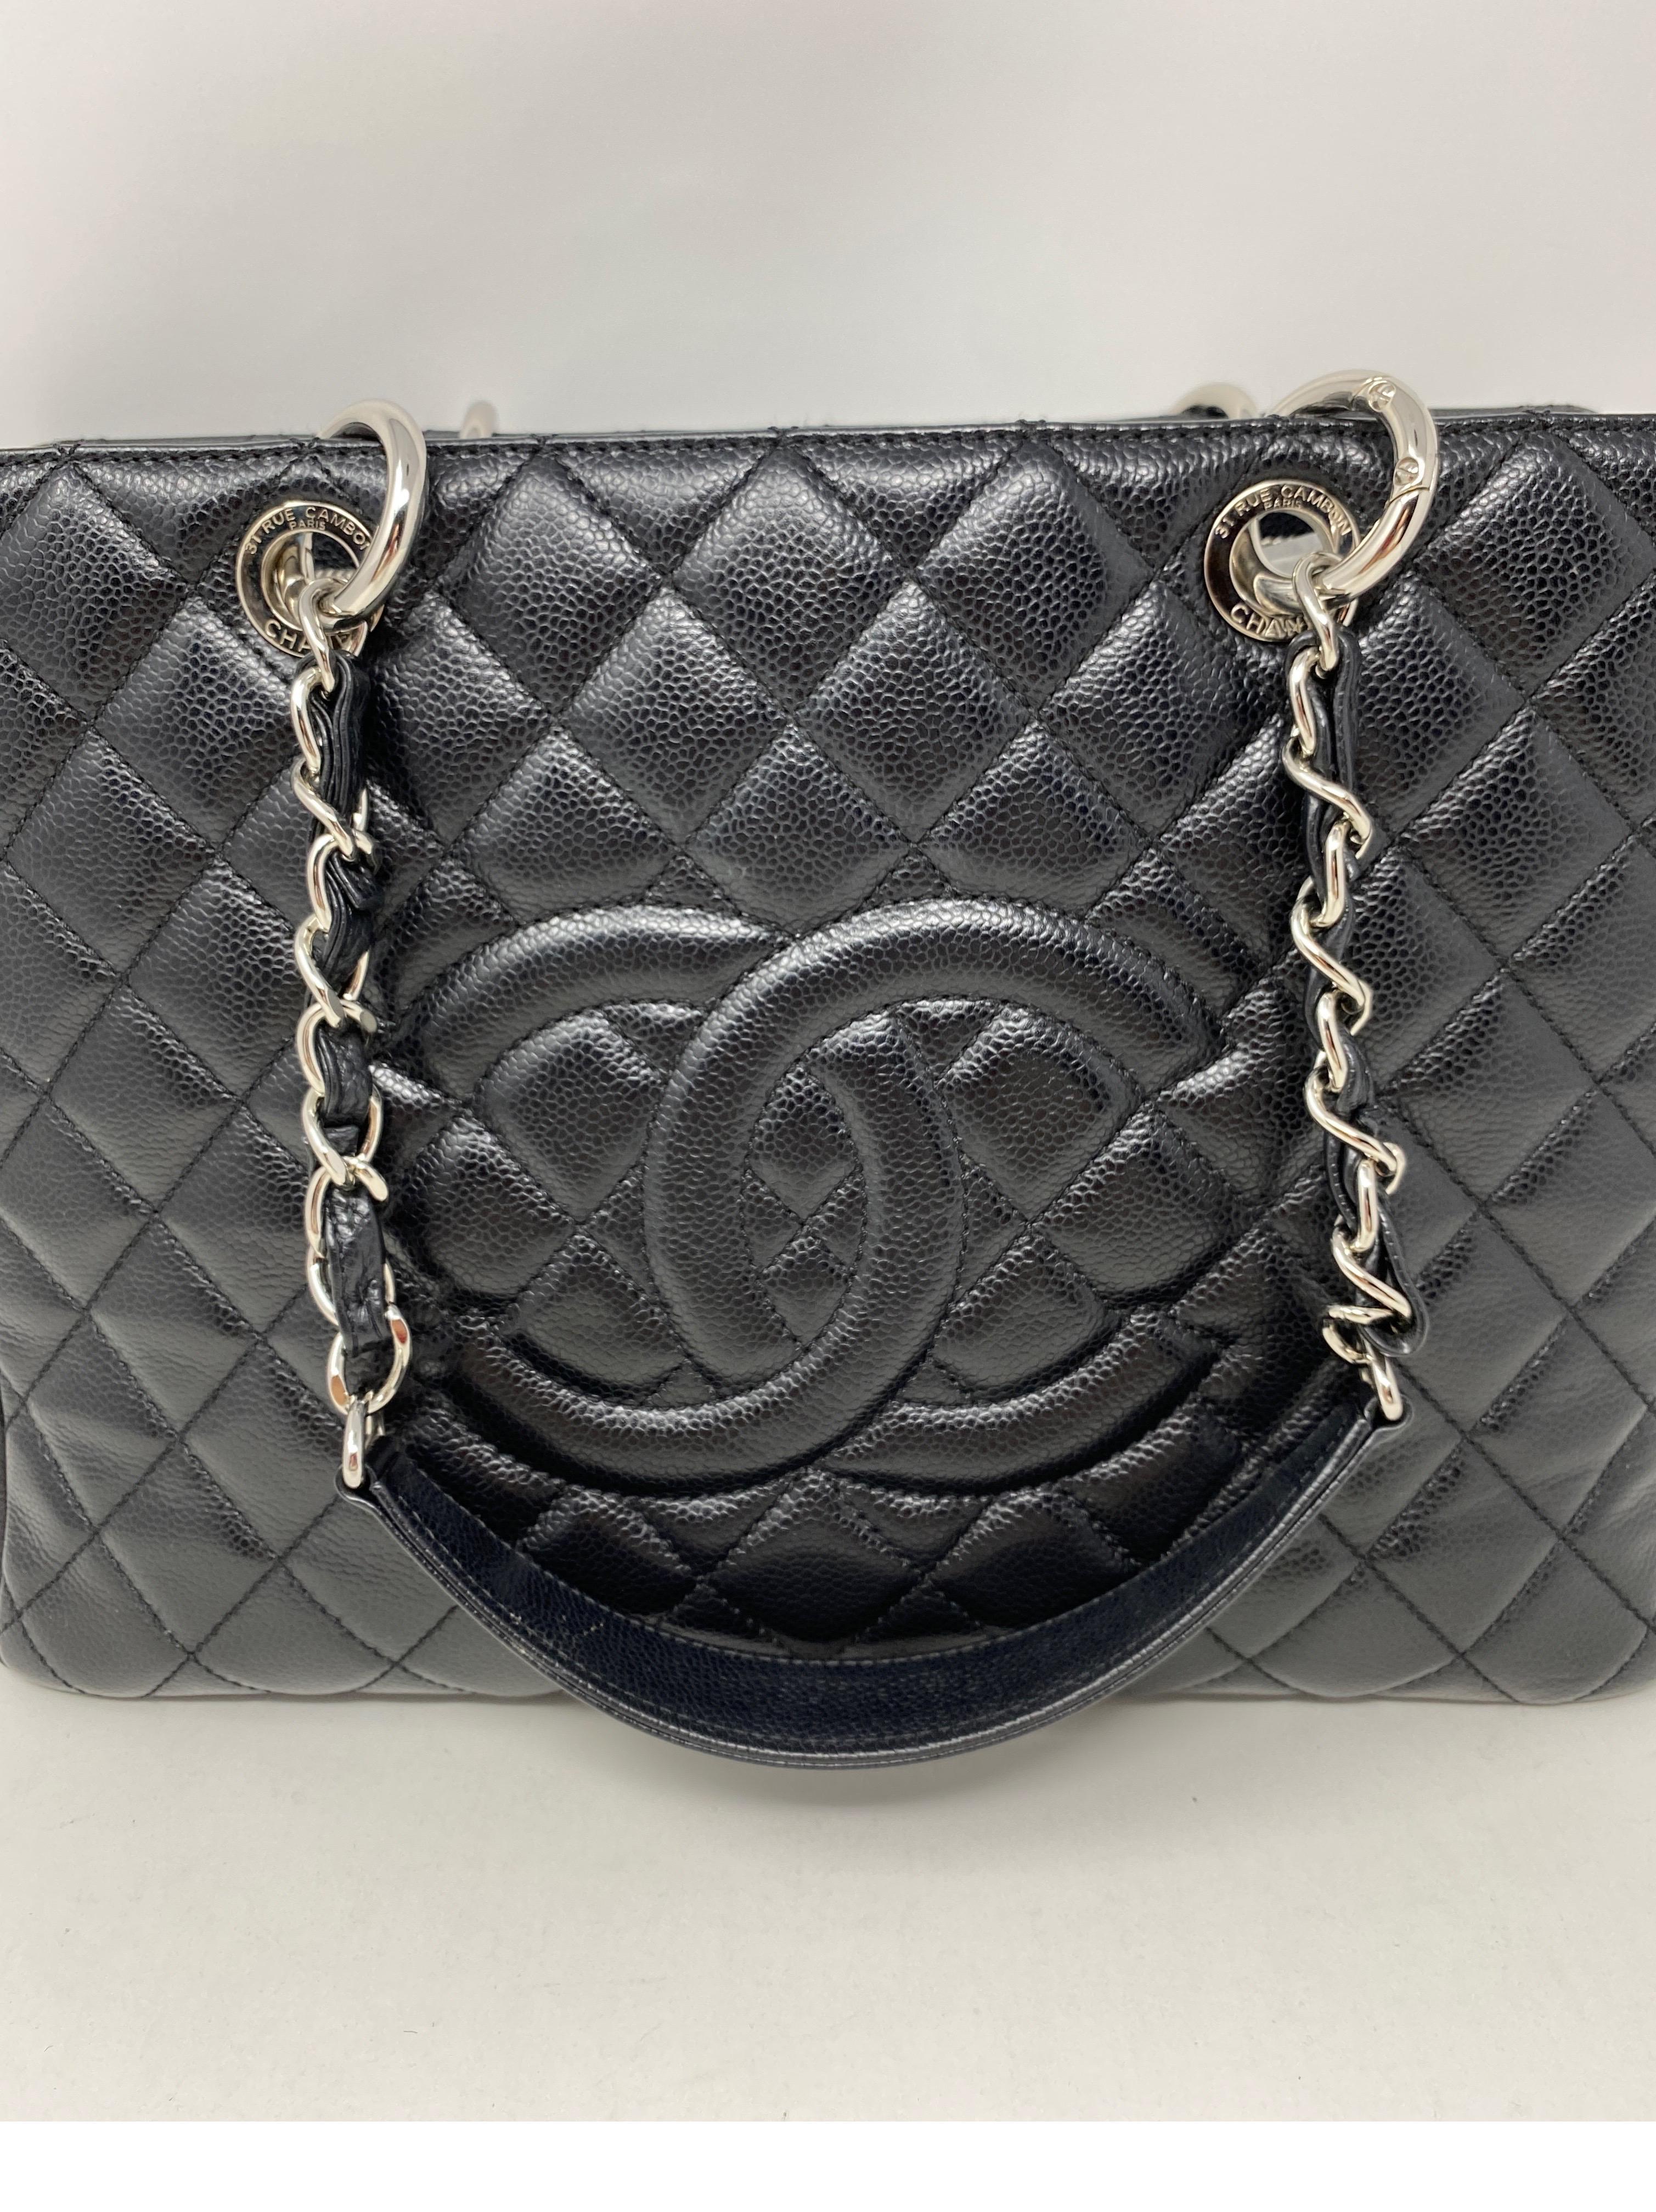 Chanel Black Grand Shopper Tote. Large size. Caviar black leather. Silver hardware. Excellent condition. Light perfume smell. Will air out. Leather is in beautiful condition. Looks like no wear exterior. GST bags are retired from Chanel. Great